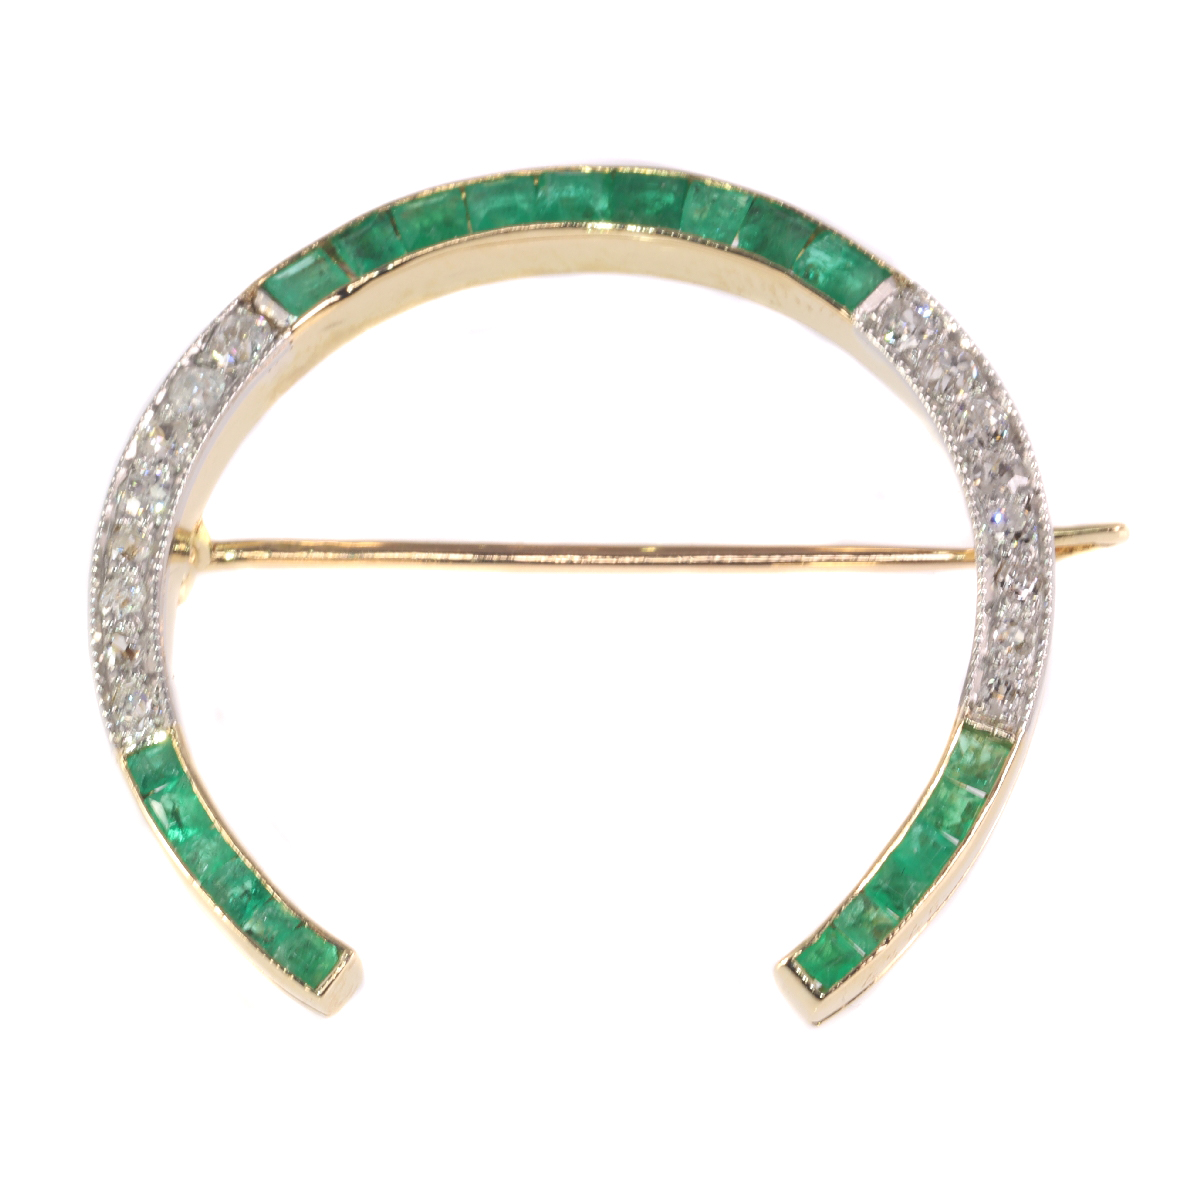 Vintage Art Deco horse shoe brooch set with diamonds and emeralds